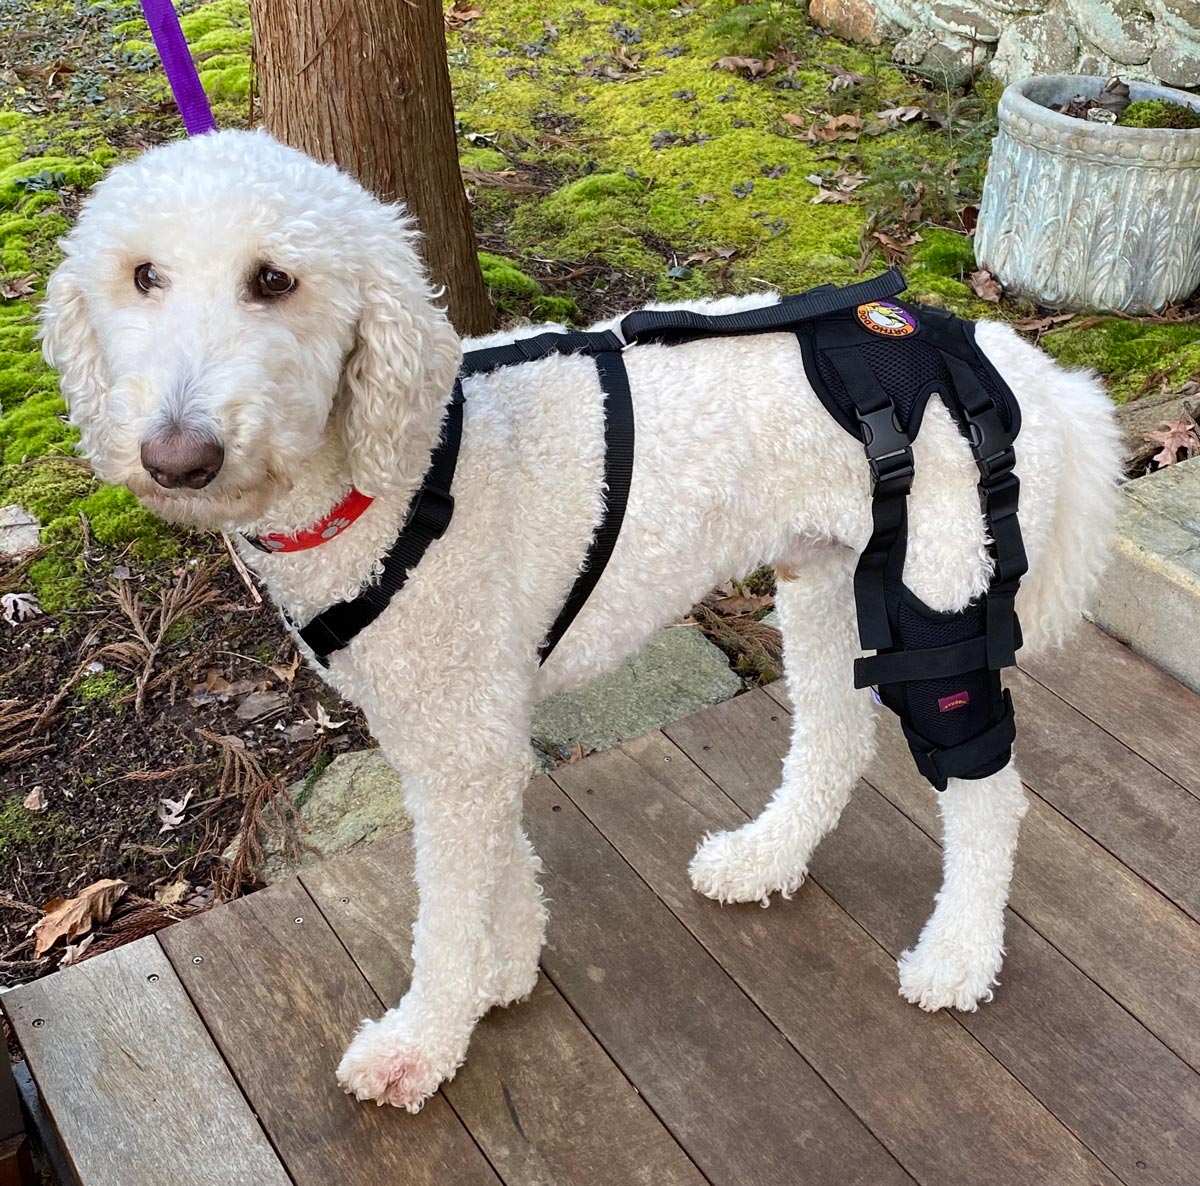 Can a dog recover from a torn ligament without surgery?